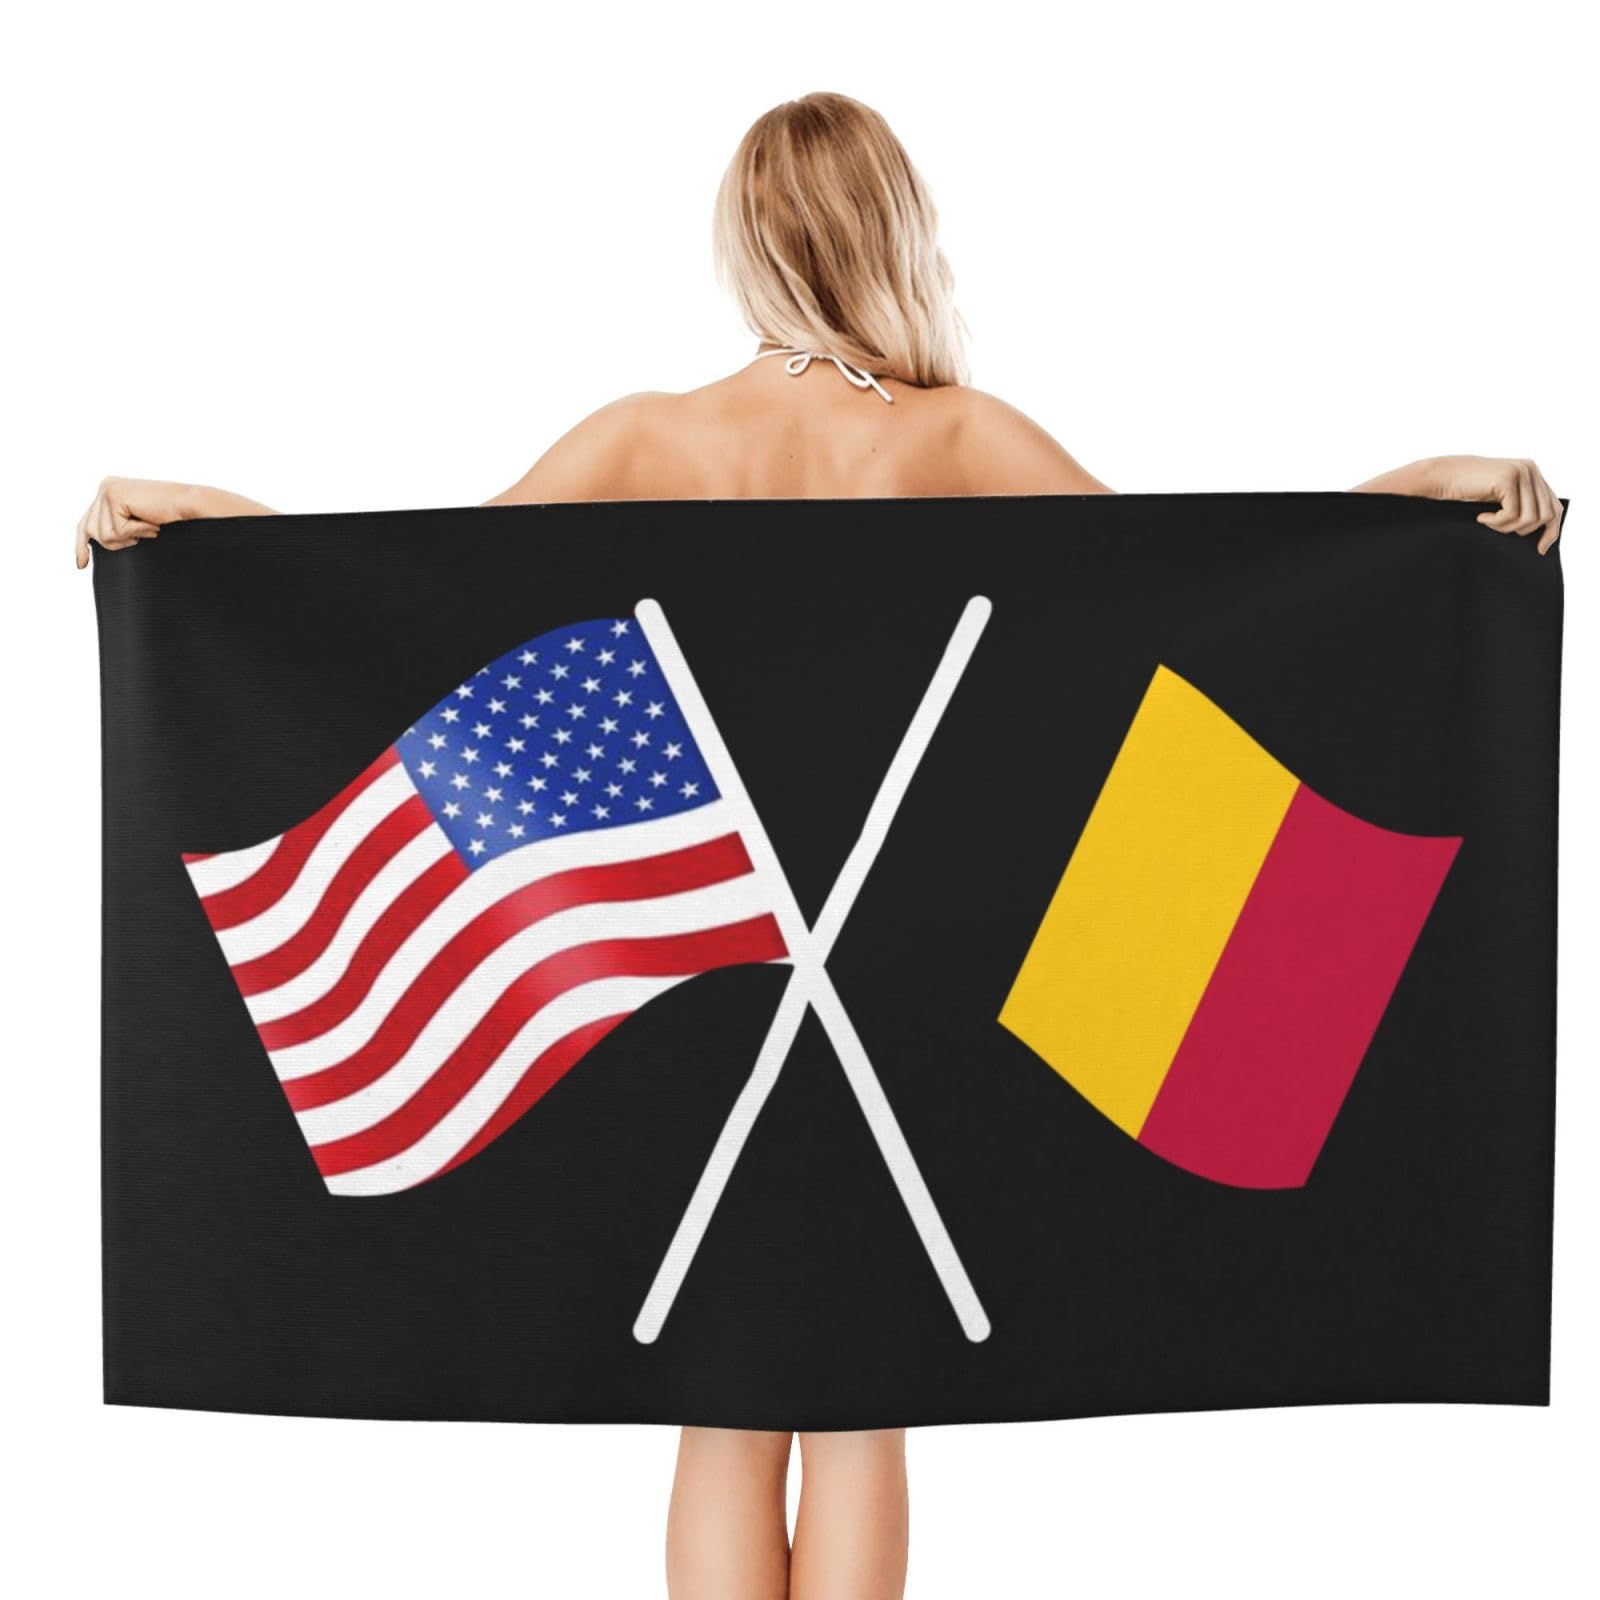 ADOSIA American and Belgium Flag Beach Towel 32x52in Oversized Soft Absorbent Beach Towel